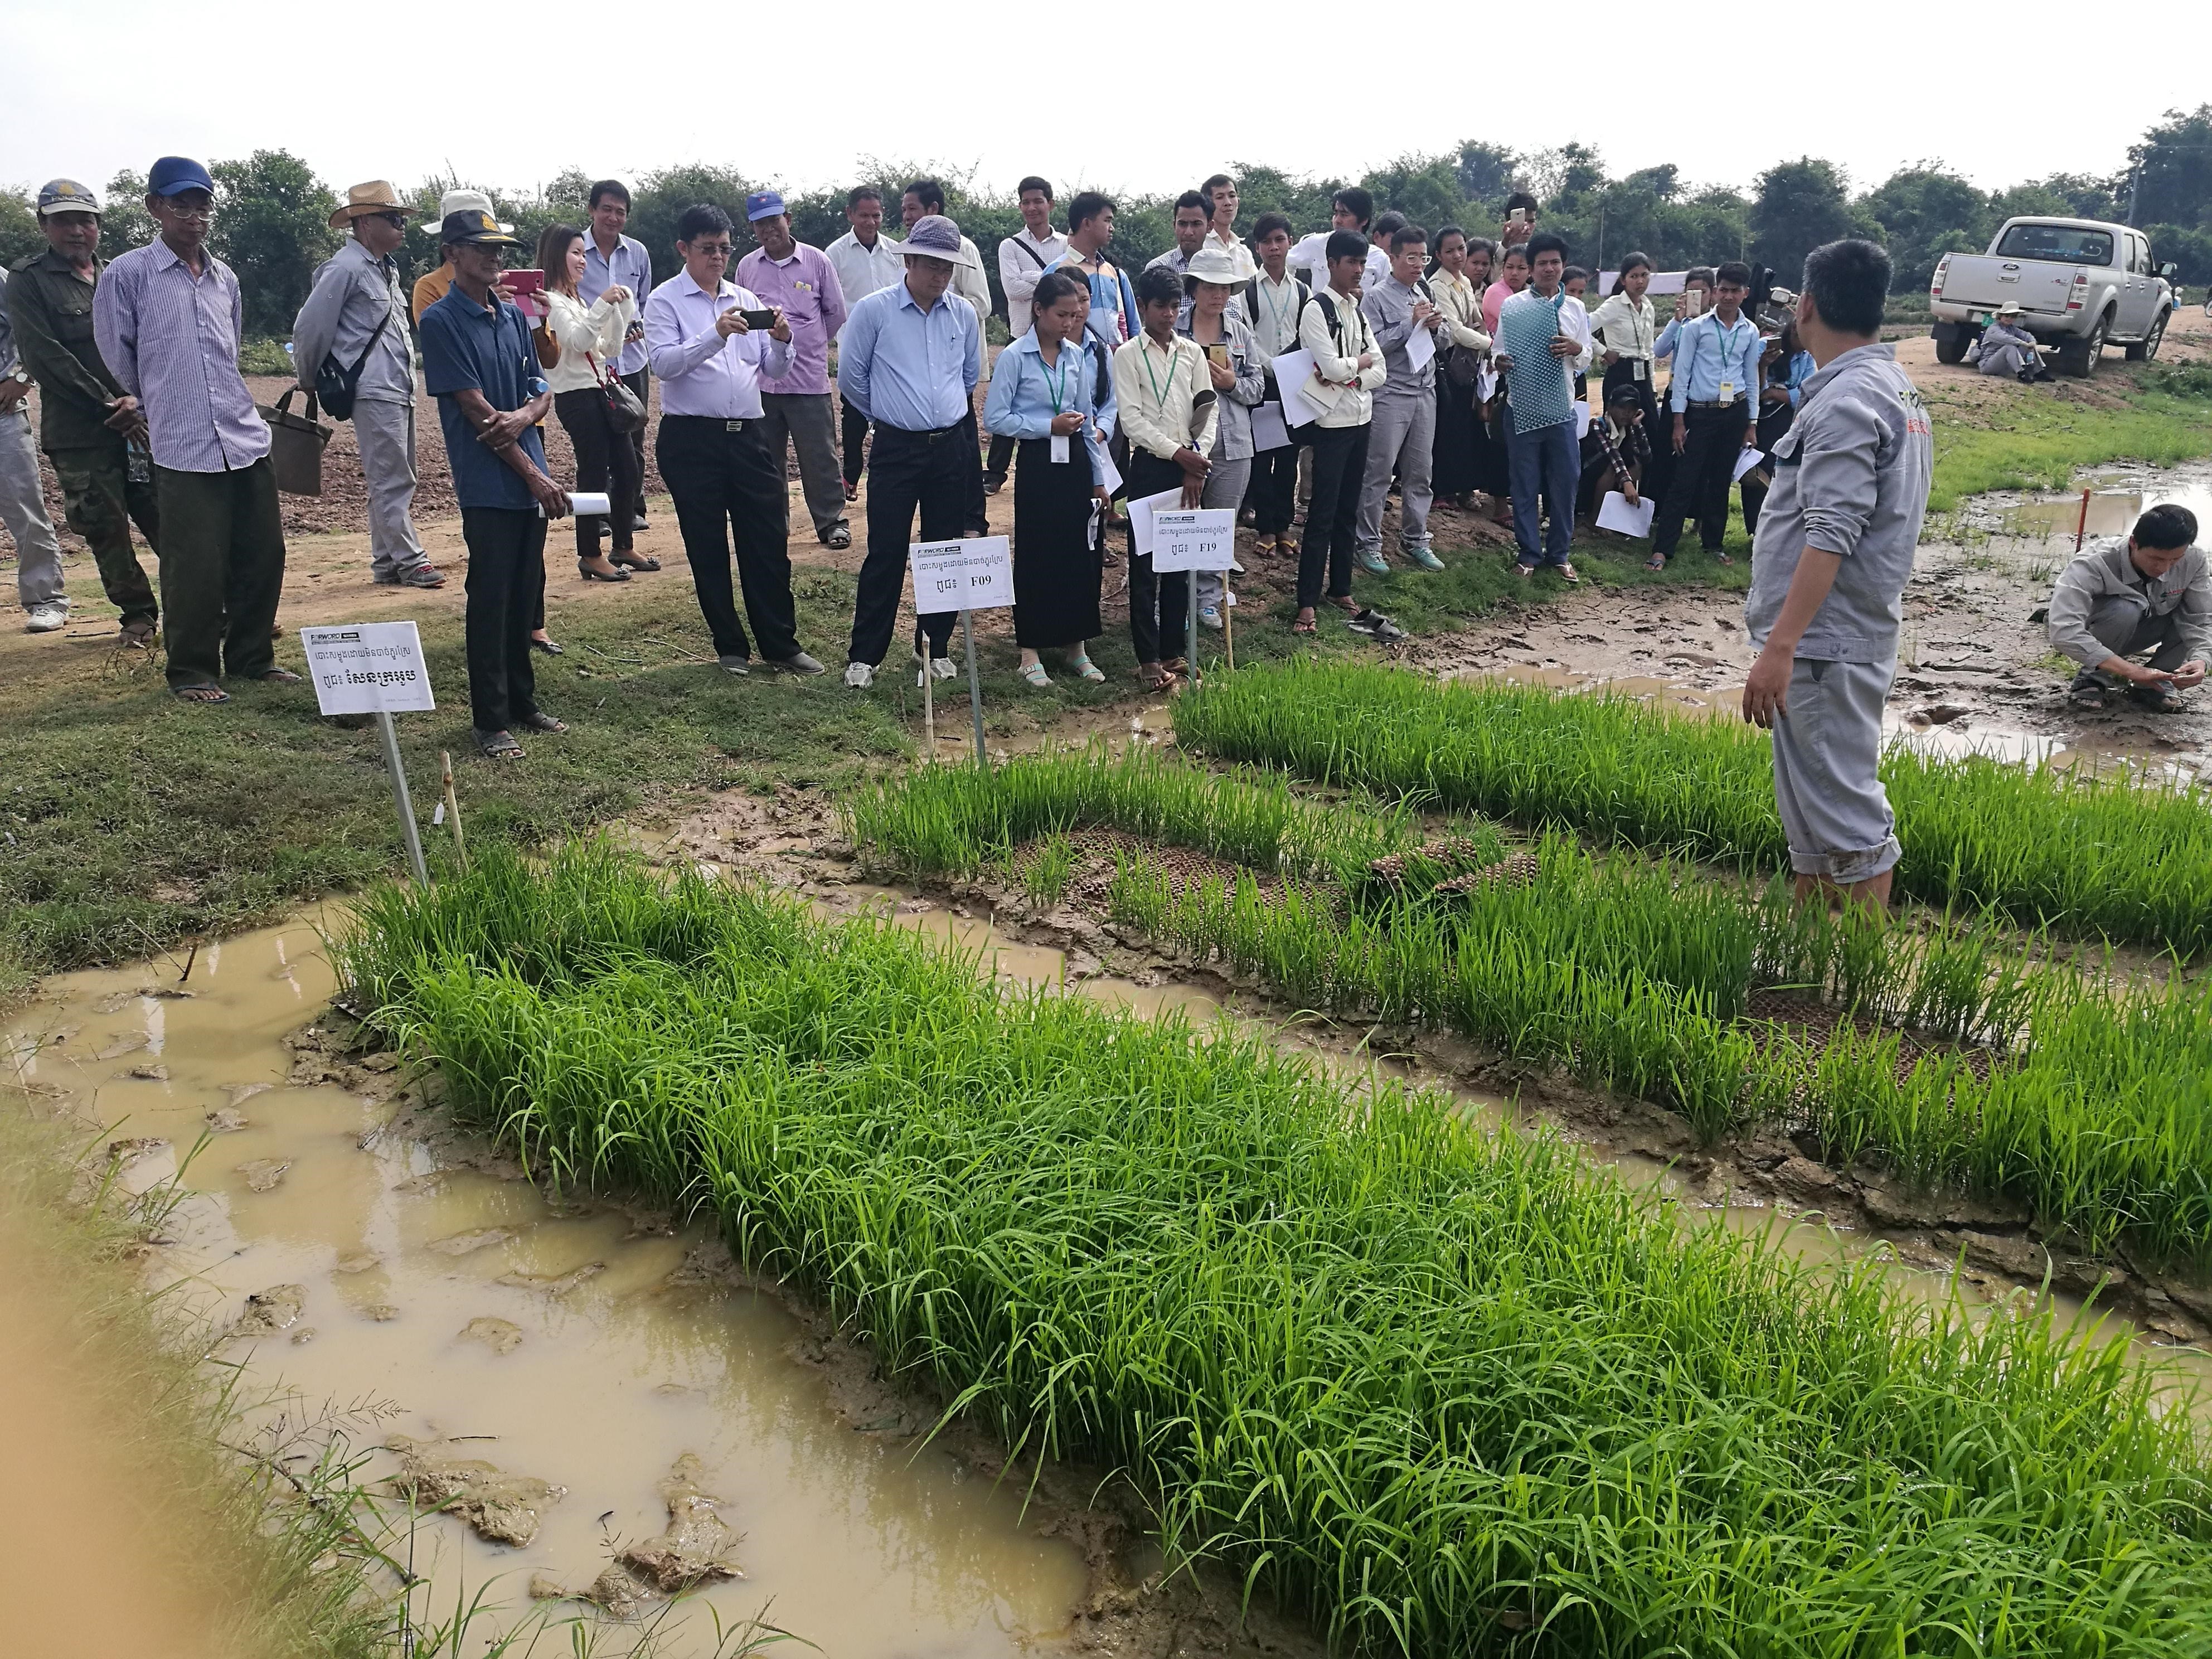 Rice planting demonstration and training